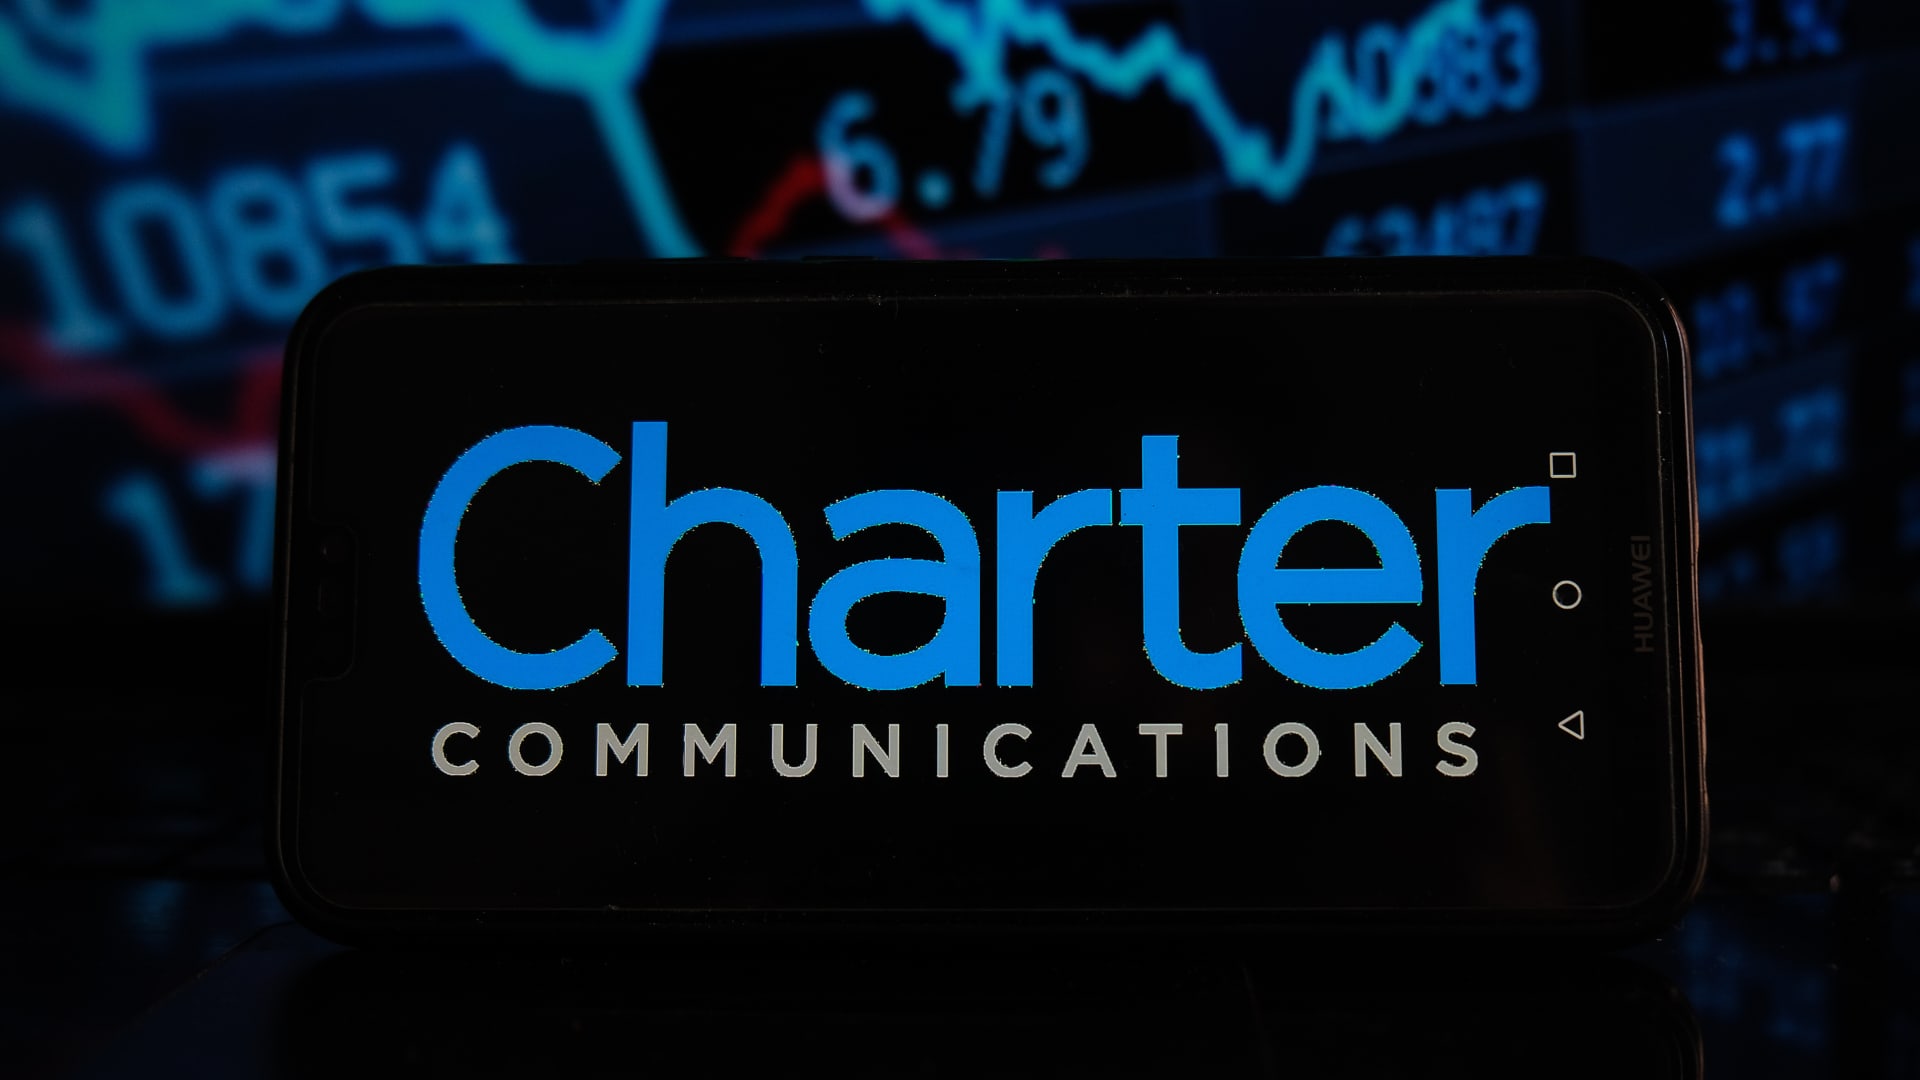 Charter shares plunge after CFO says company may lose broadband subs